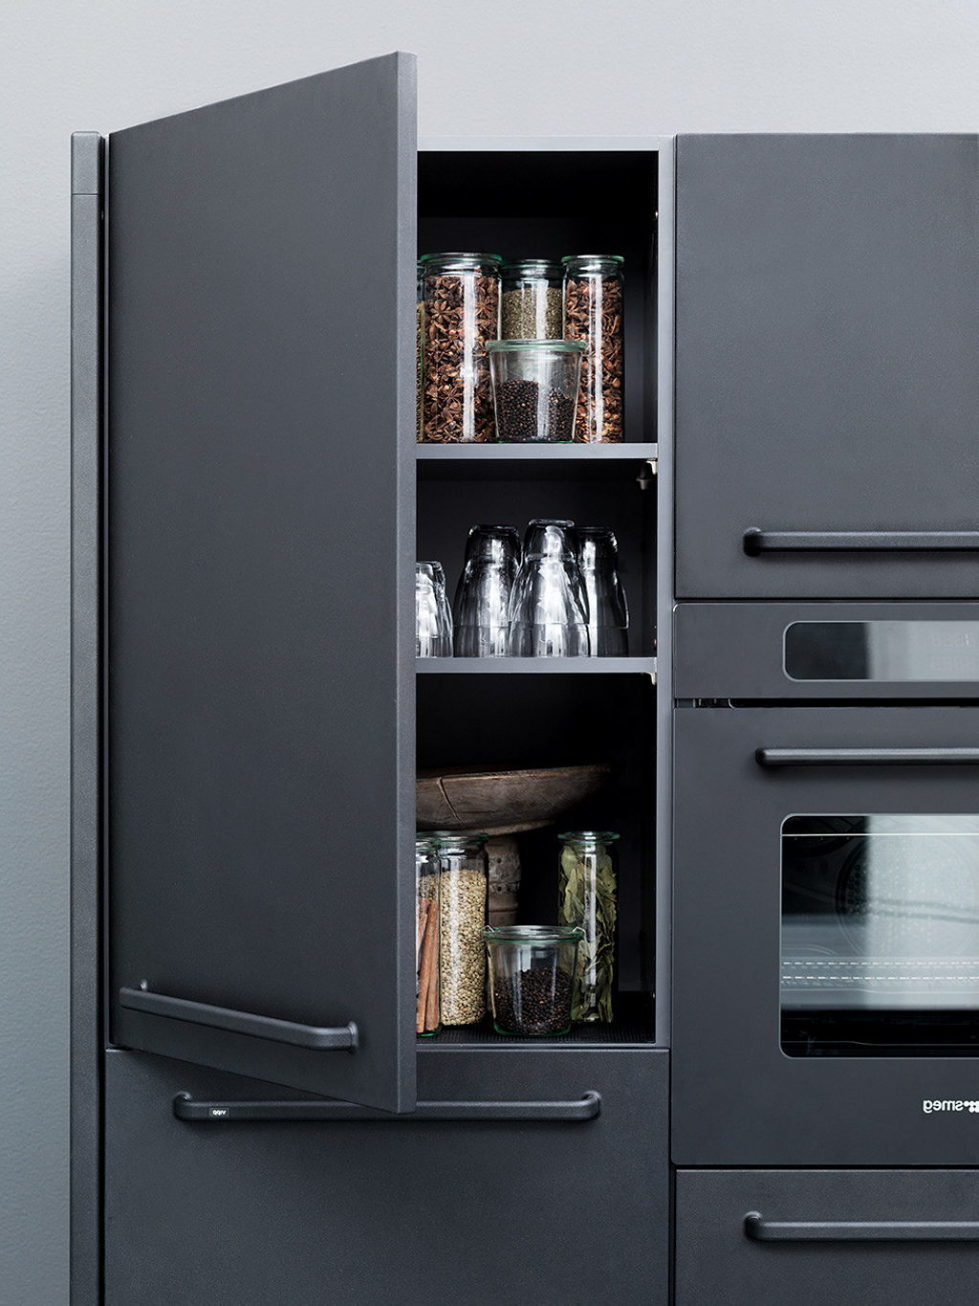 The practical kitchen of stainless steel from Vipp 2